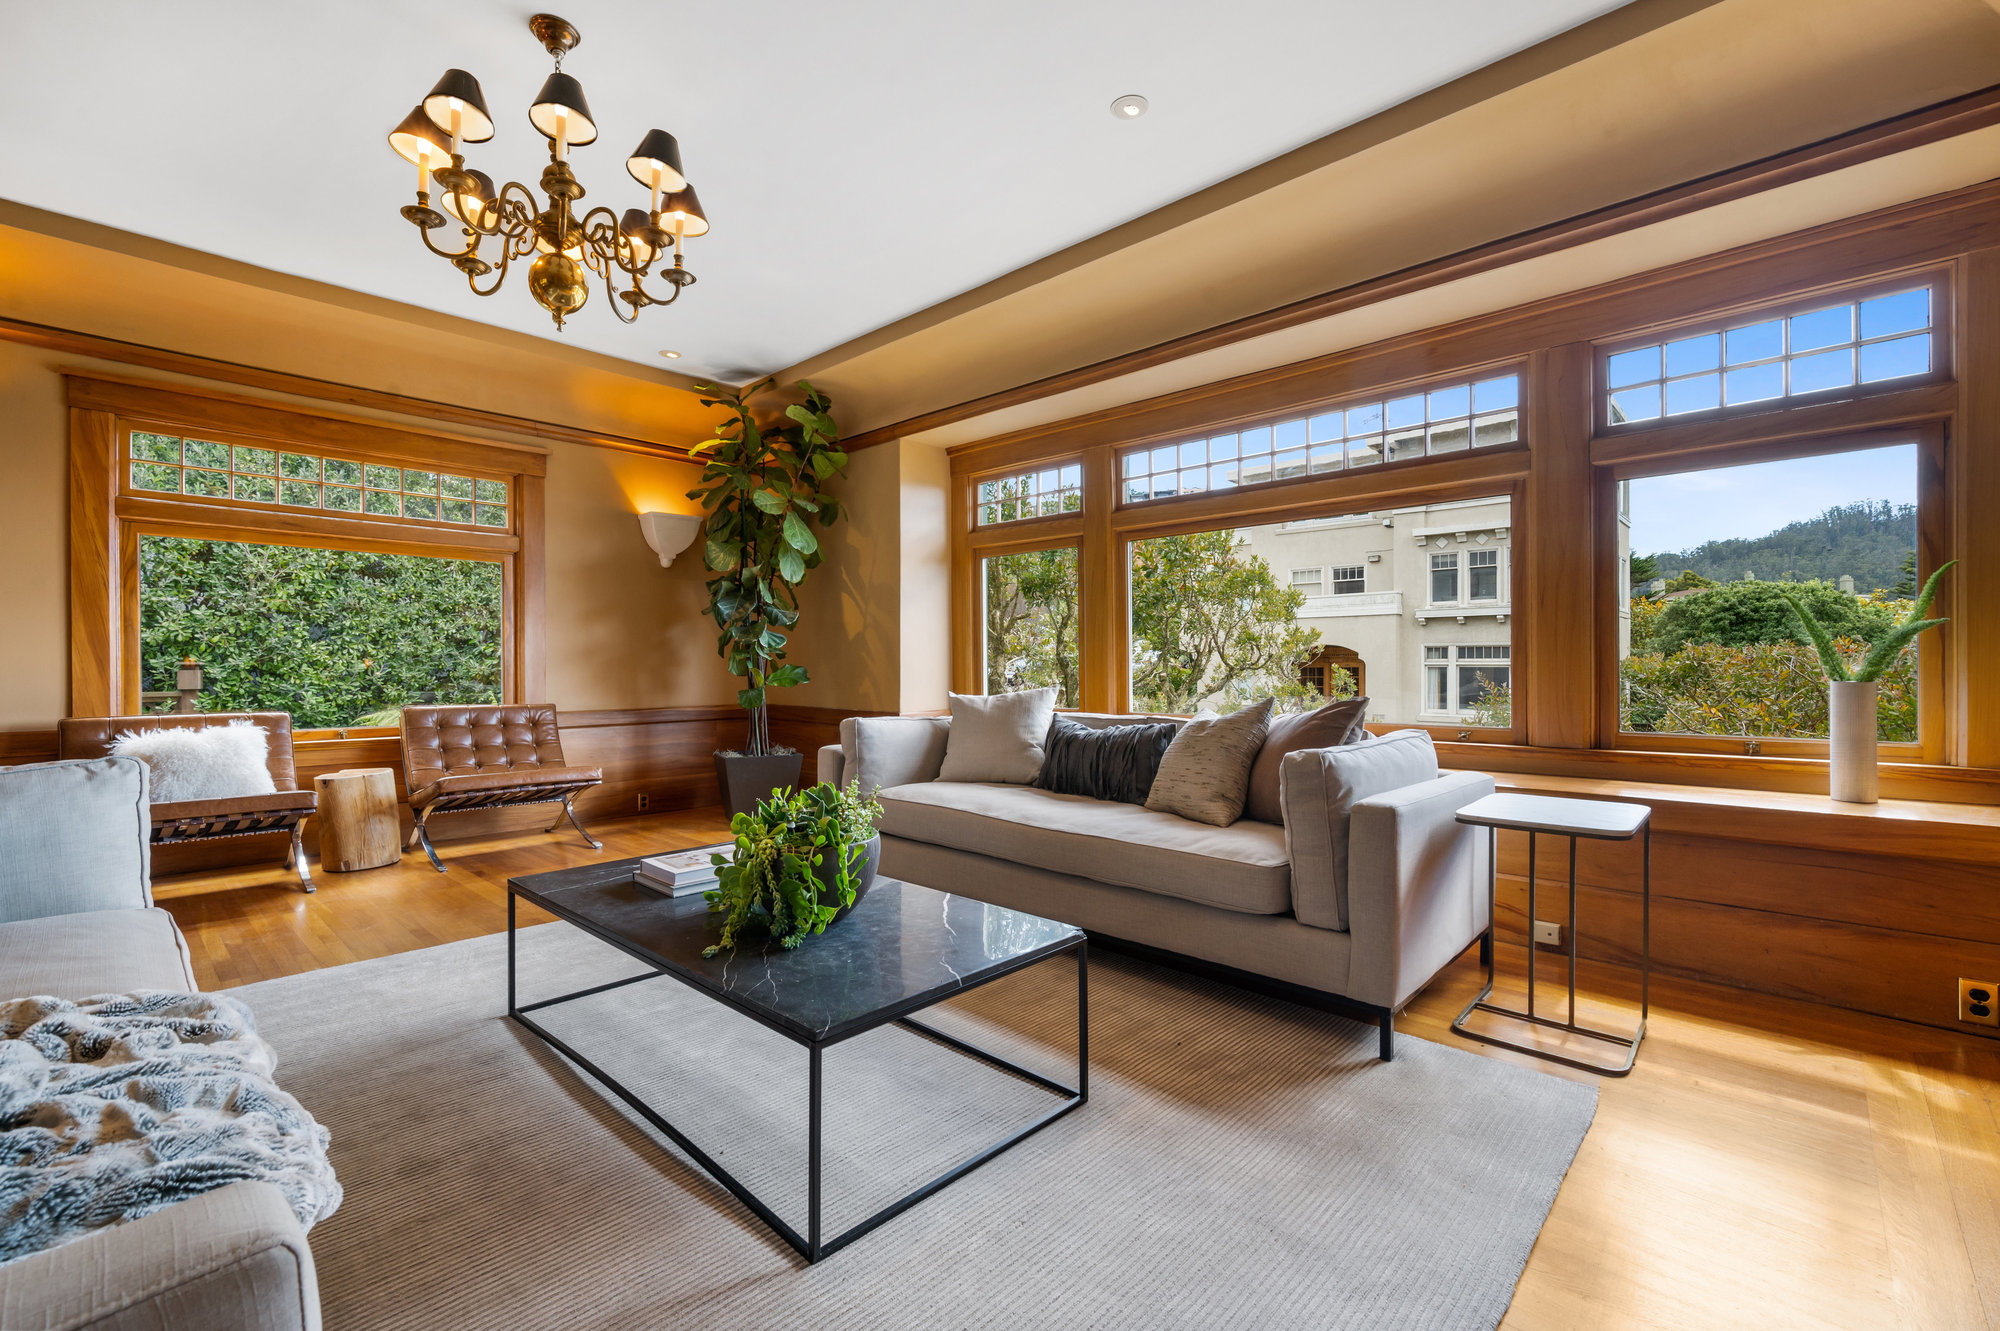 Property Photo: Formal living room with large windows and wide wood frames